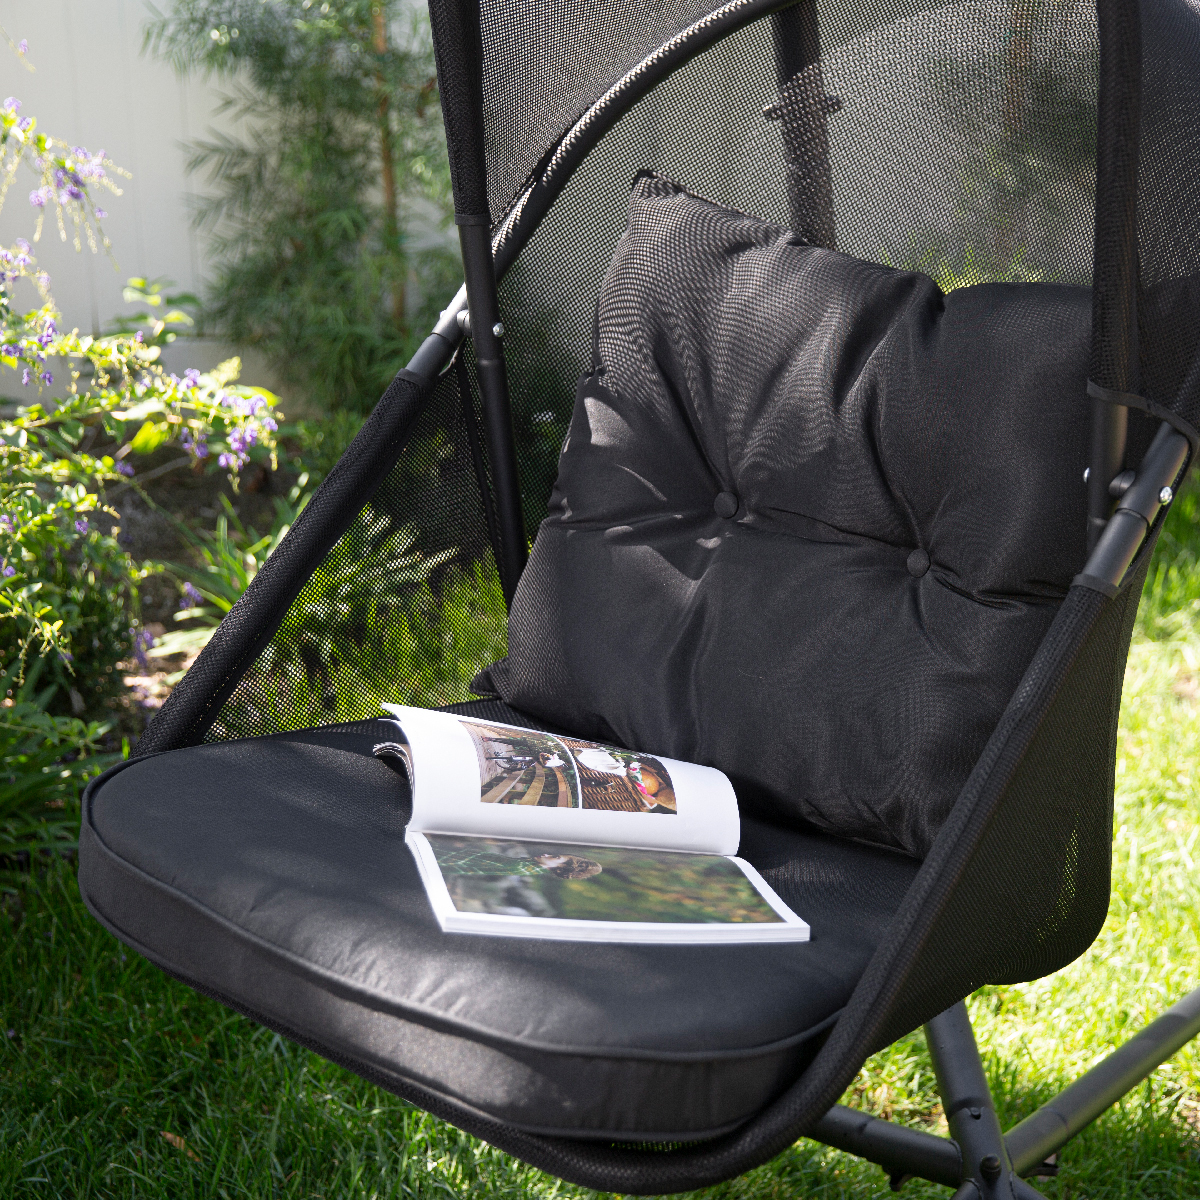 Patio Hanging Egg Chair W/ Canopy Chair with Cushion Basket Lounge Seat Collapsible Chair Seat, Black - image 3 of 7